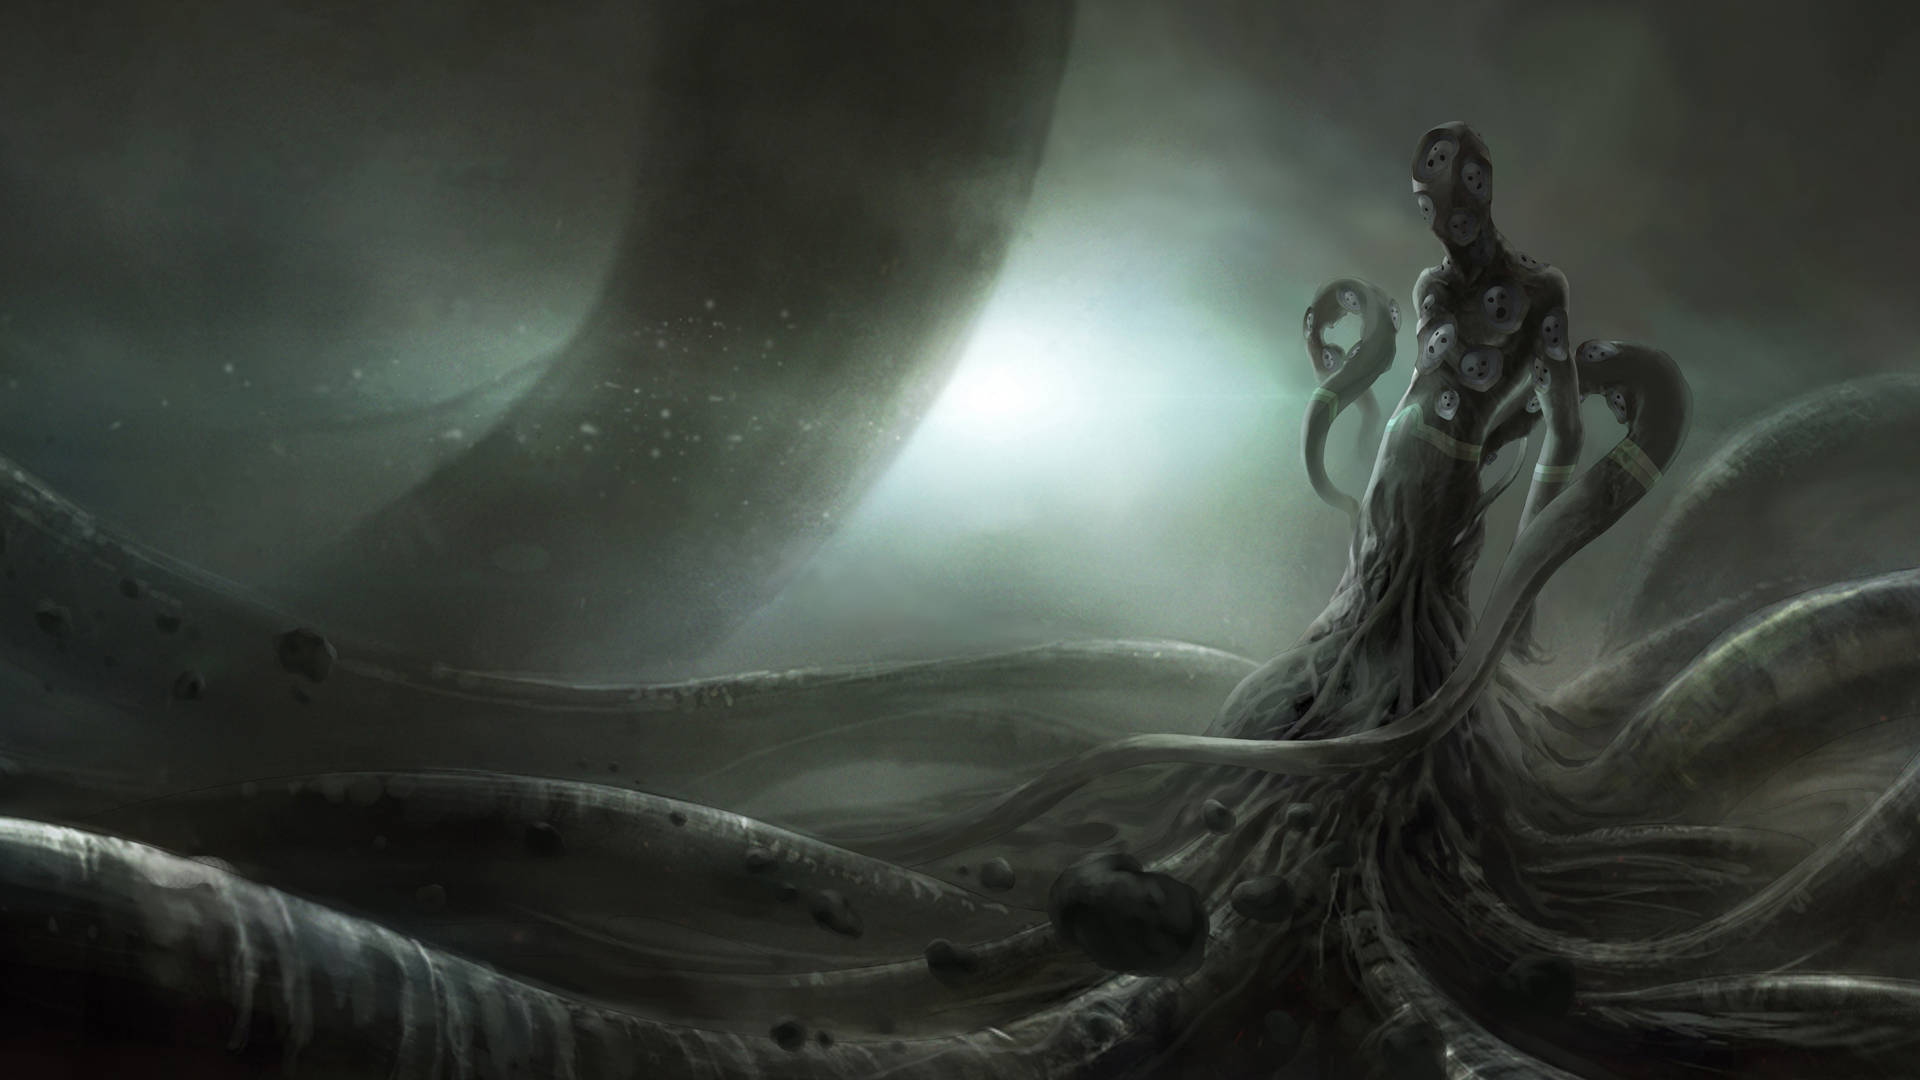 The eerie tentacles of Cthulhu stretching out into the darkness. Wallpaper